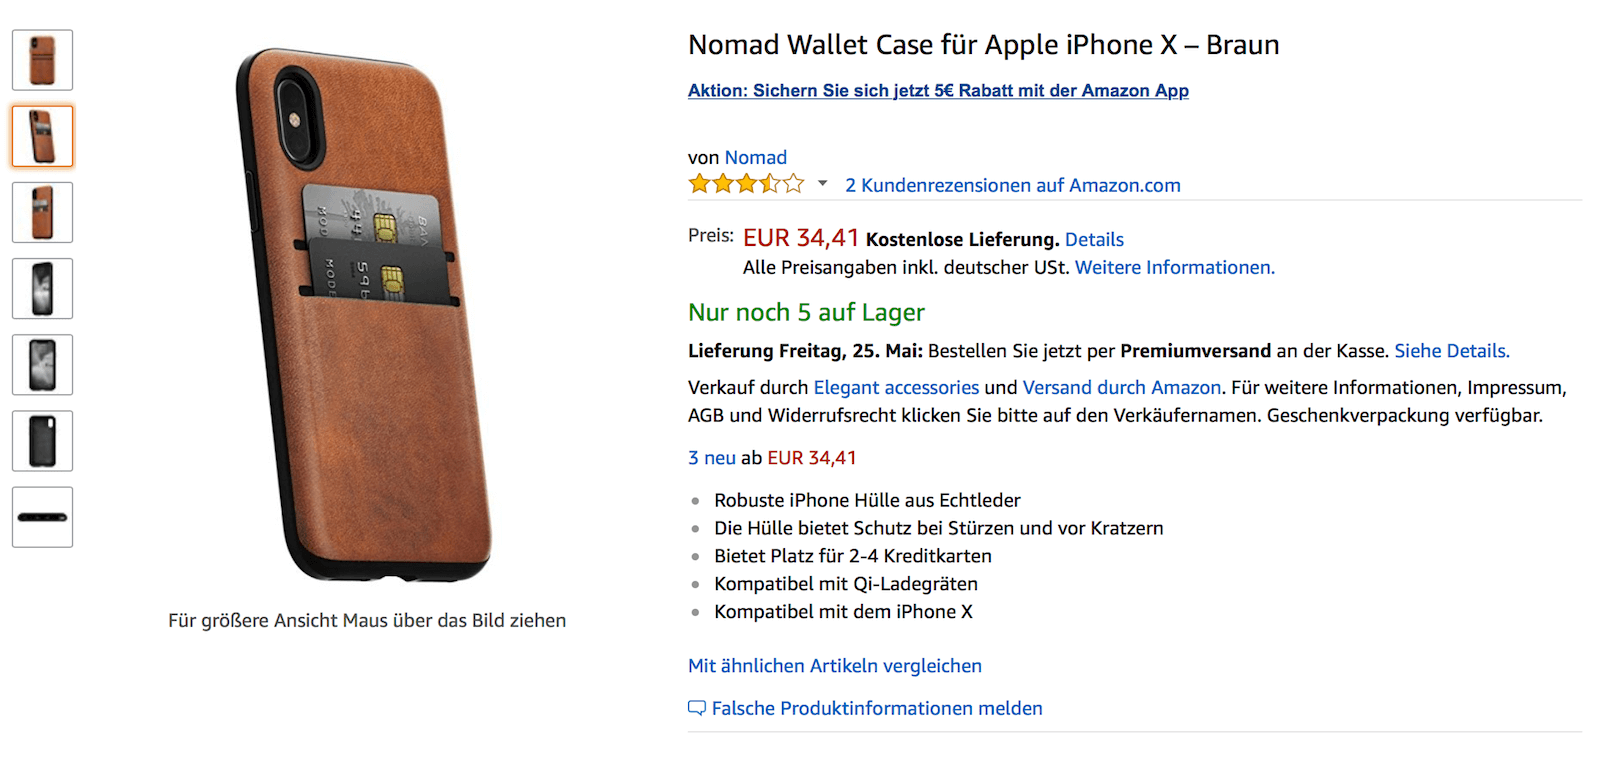 NOMAD Wallet Case price in euro in the German Amazon online store